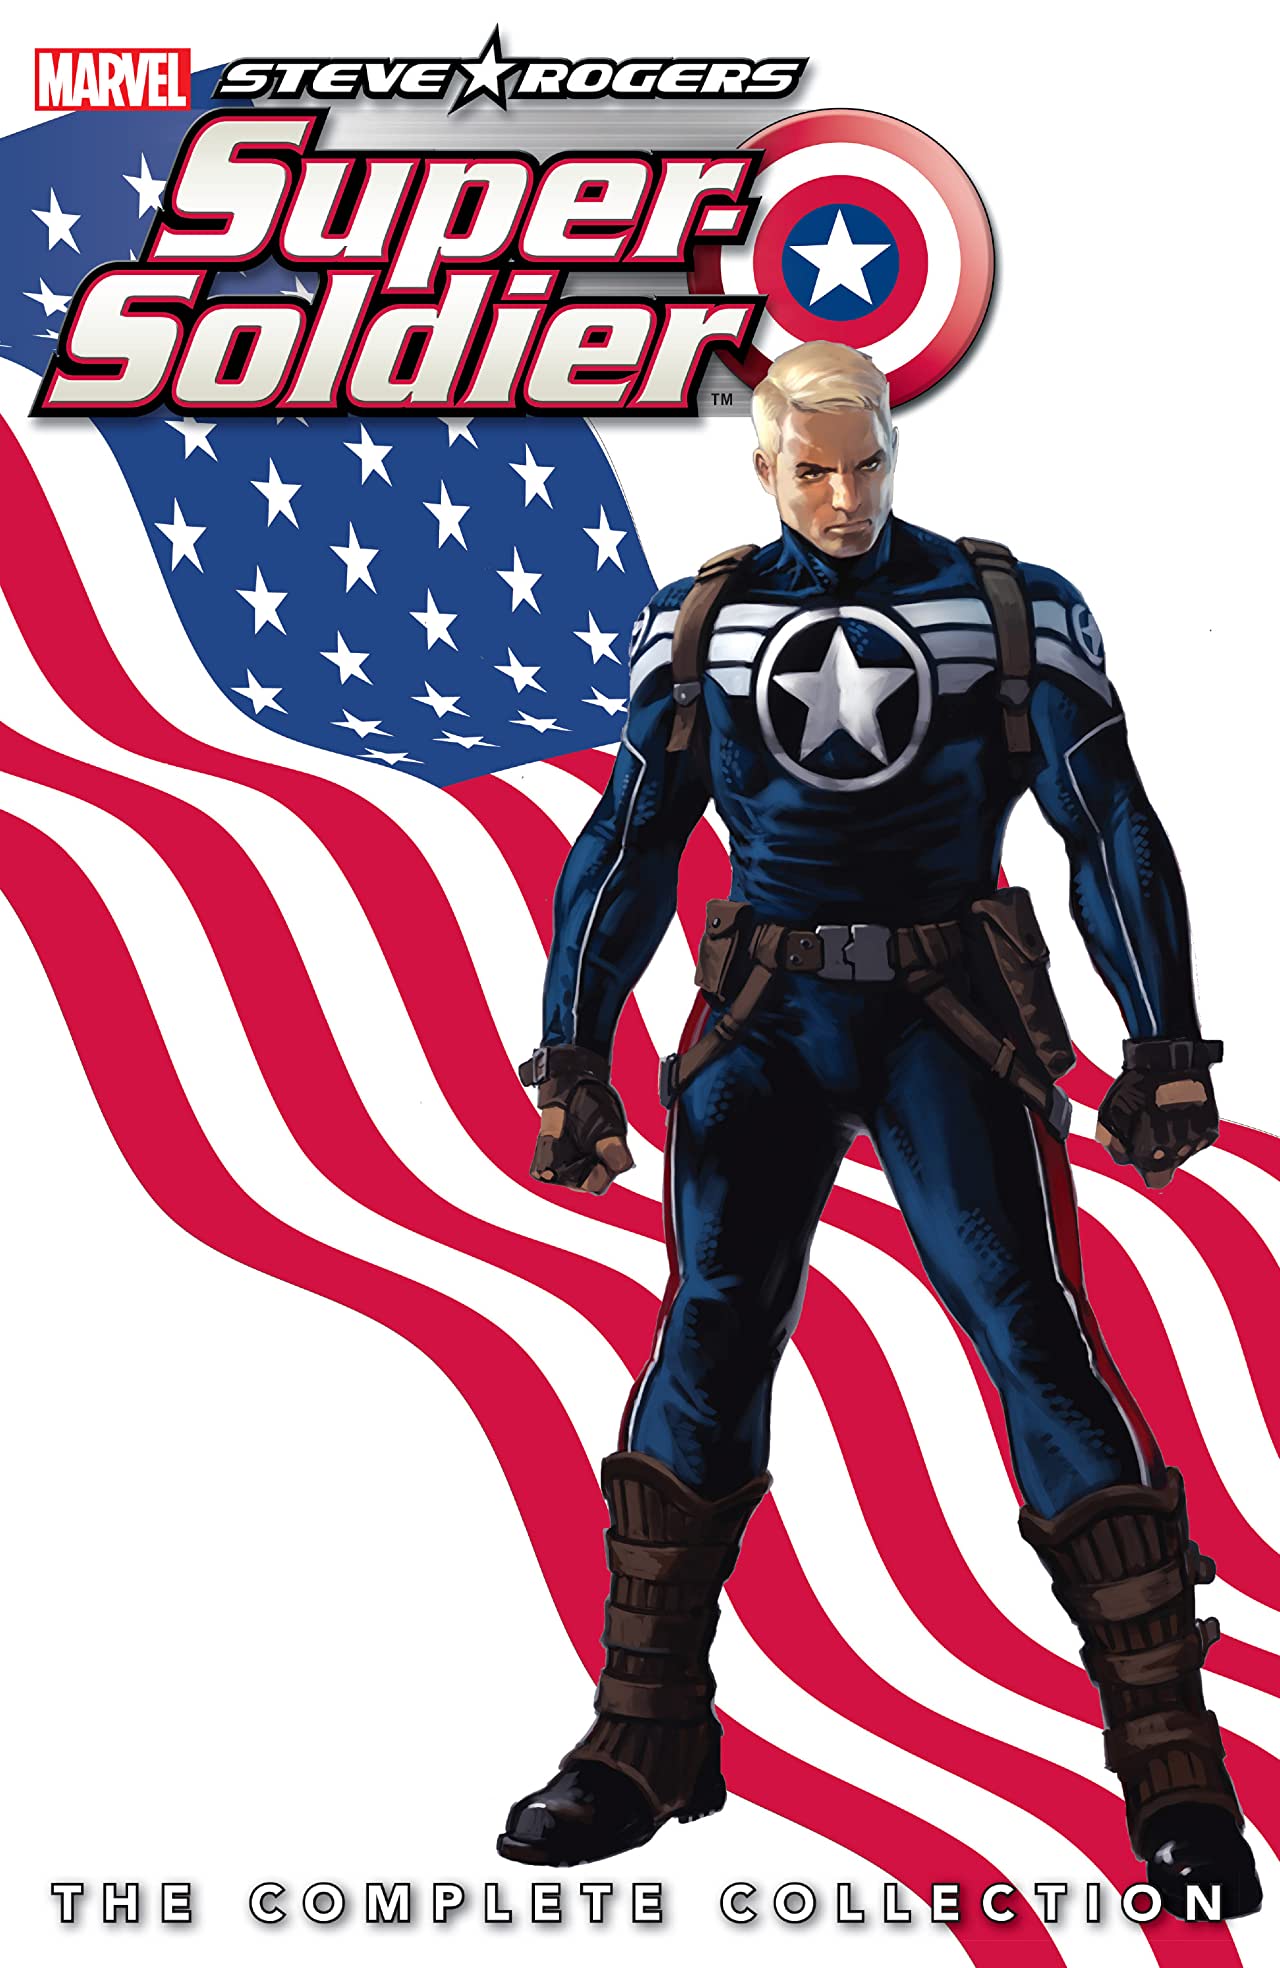 Steve Rogers: Super Soldier - The Complete Collection